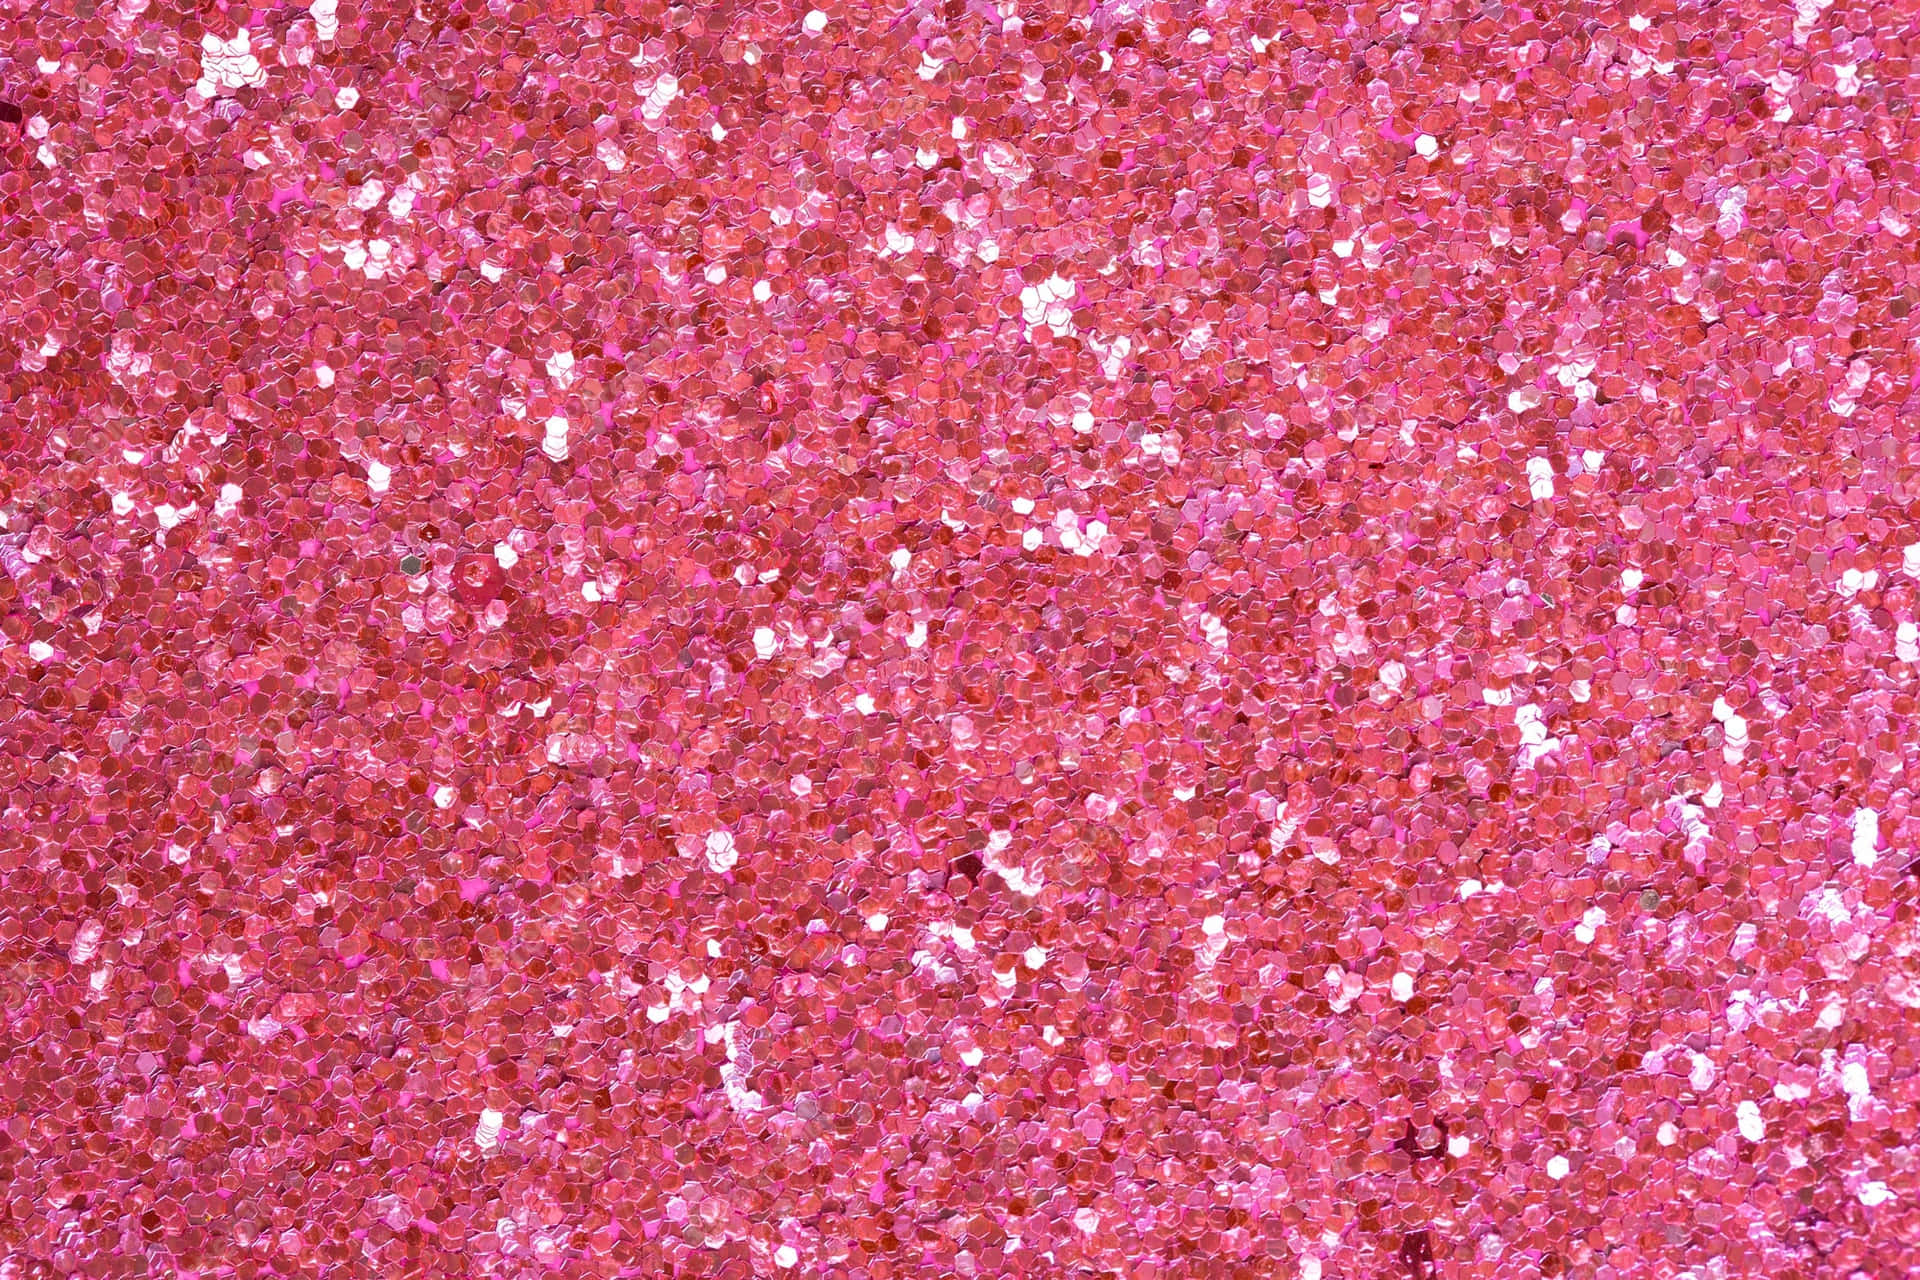 "Beautiful and festive; a stunning pink sparkle background."